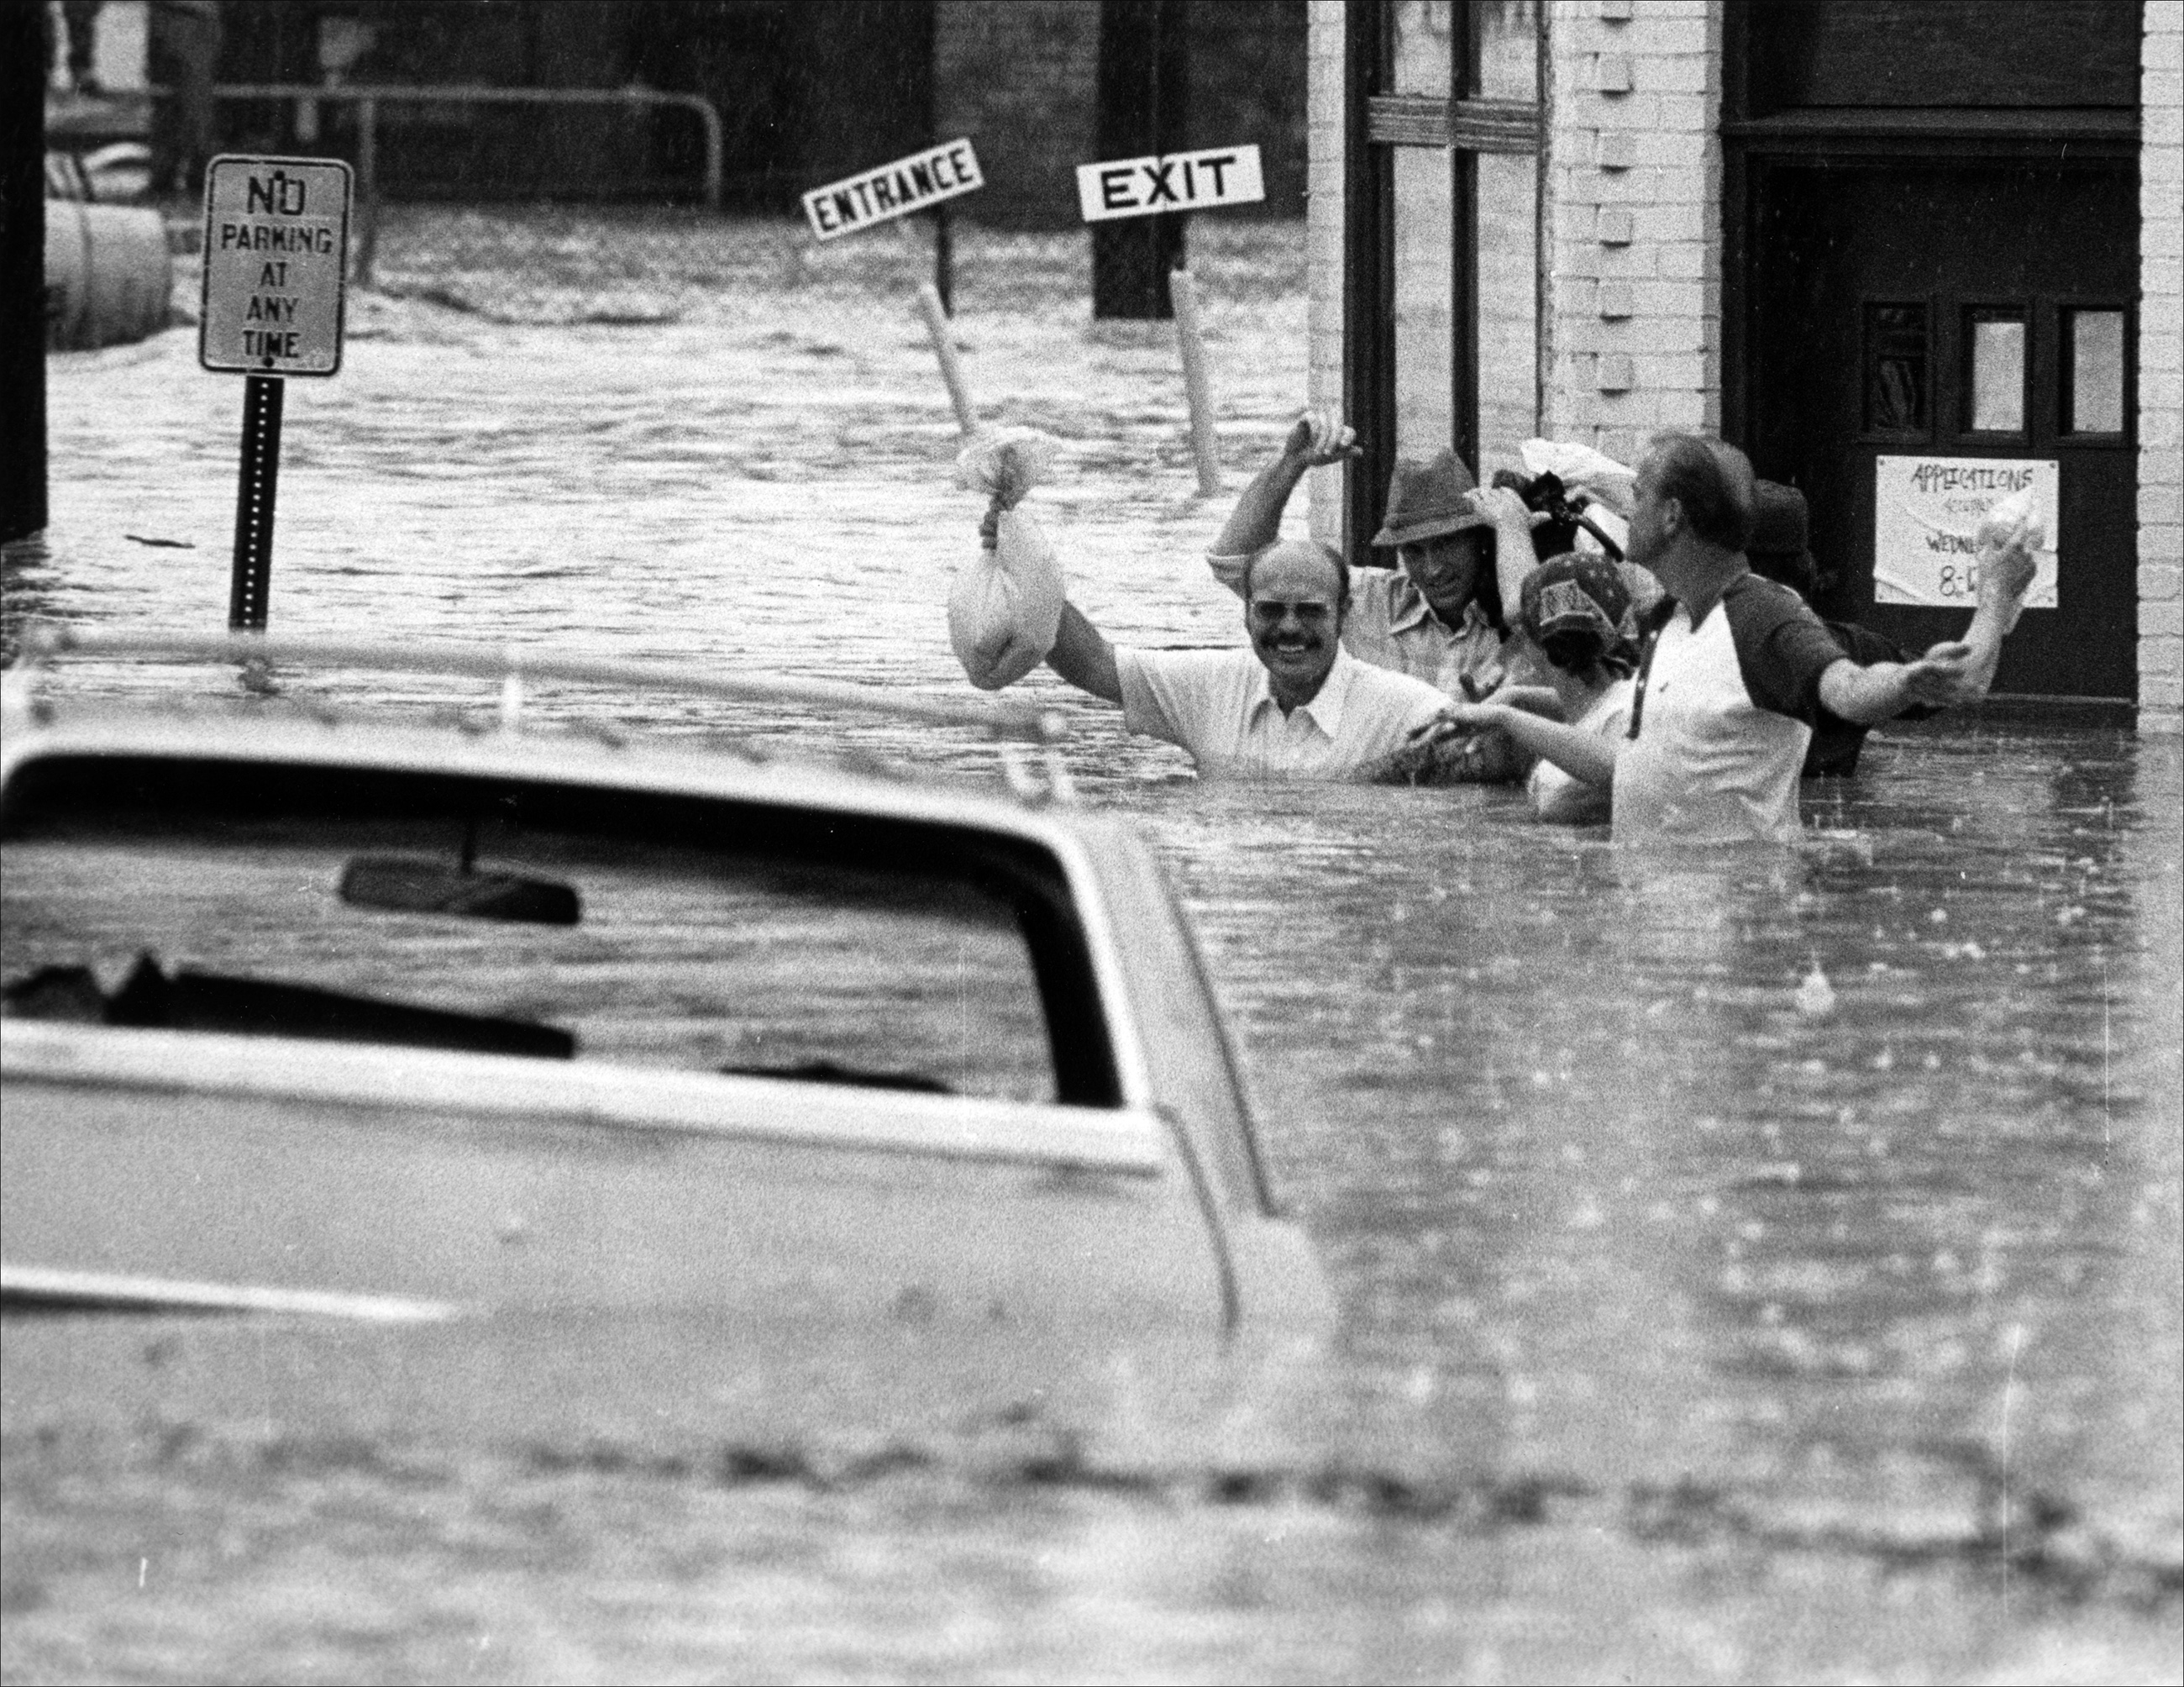 Black and white photograph of a group of men wading through heavily flooded streets.